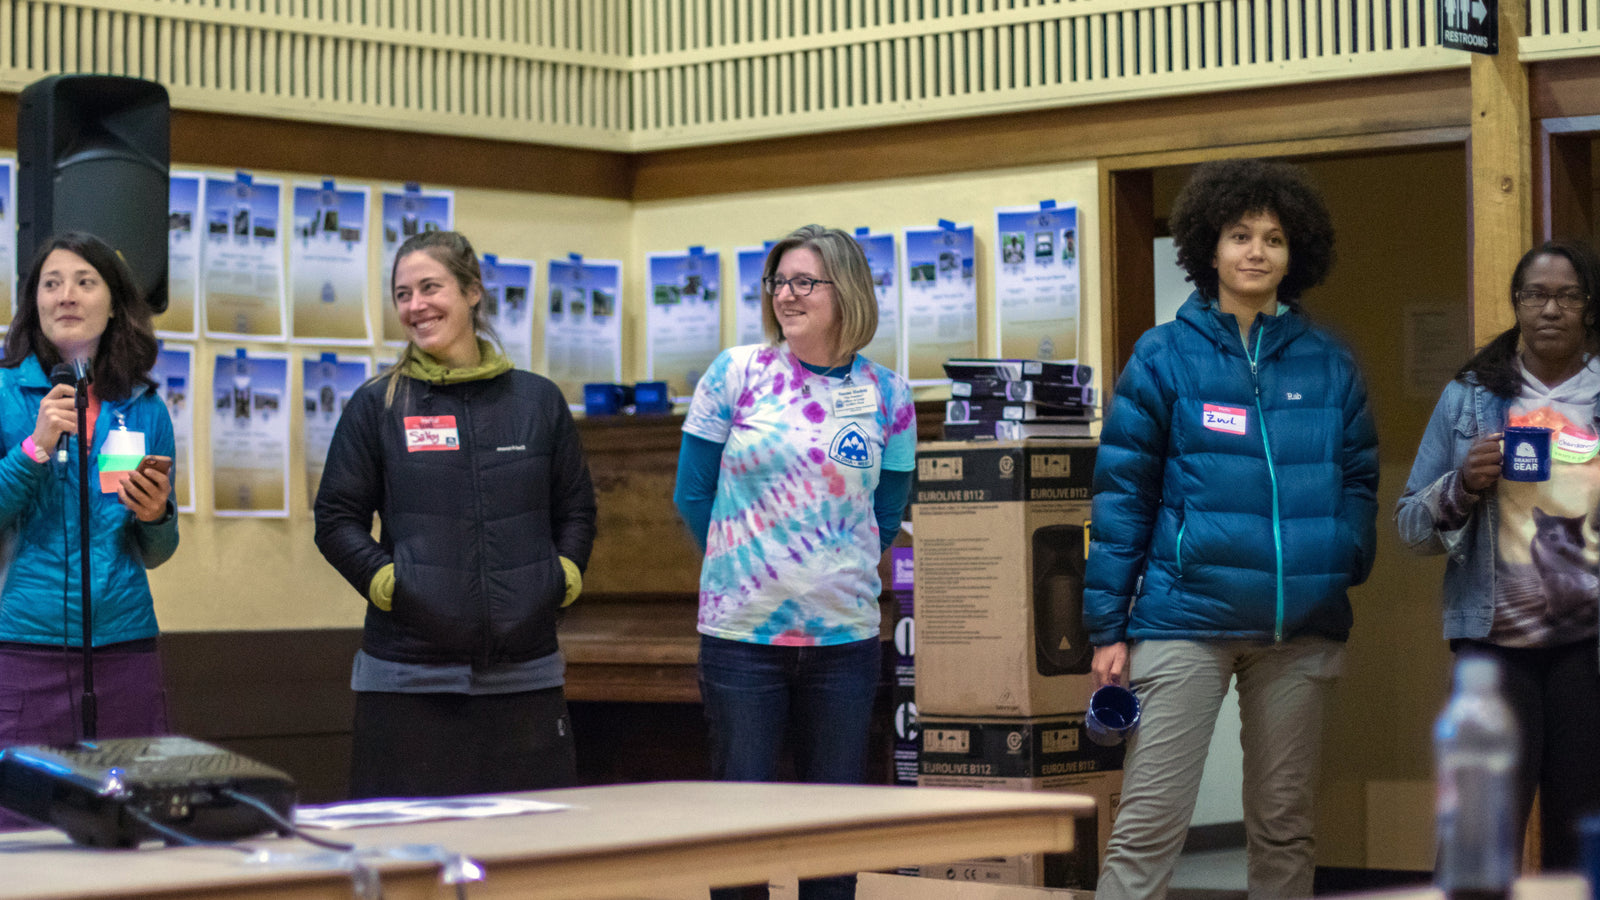 five women with trail name tags standing. One holds a microphone.